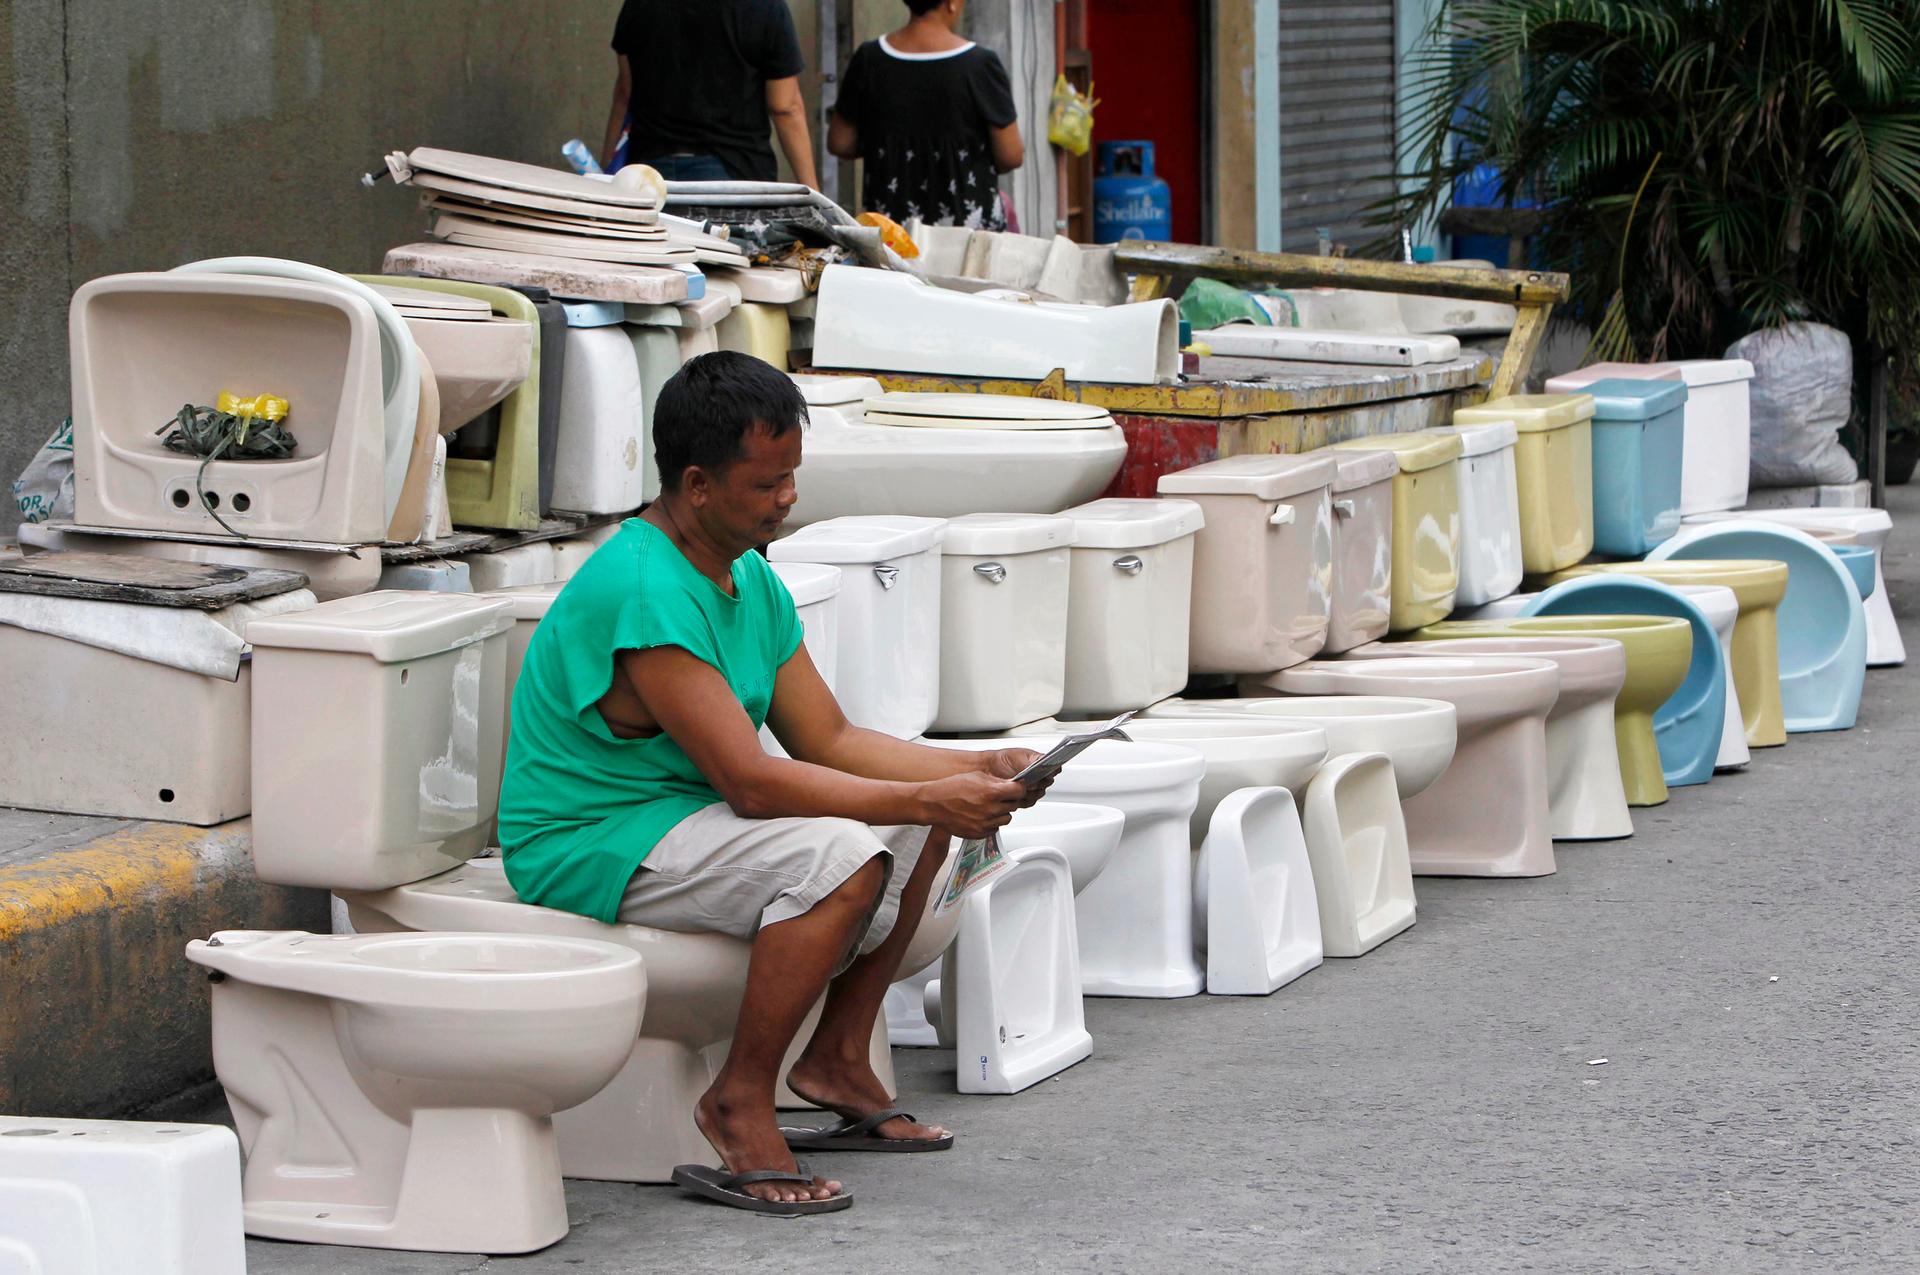 A man reads a newspaper while sitting on a second-hand toilet bowl he's selling in Manila, Philippines, on November 19, 2012.